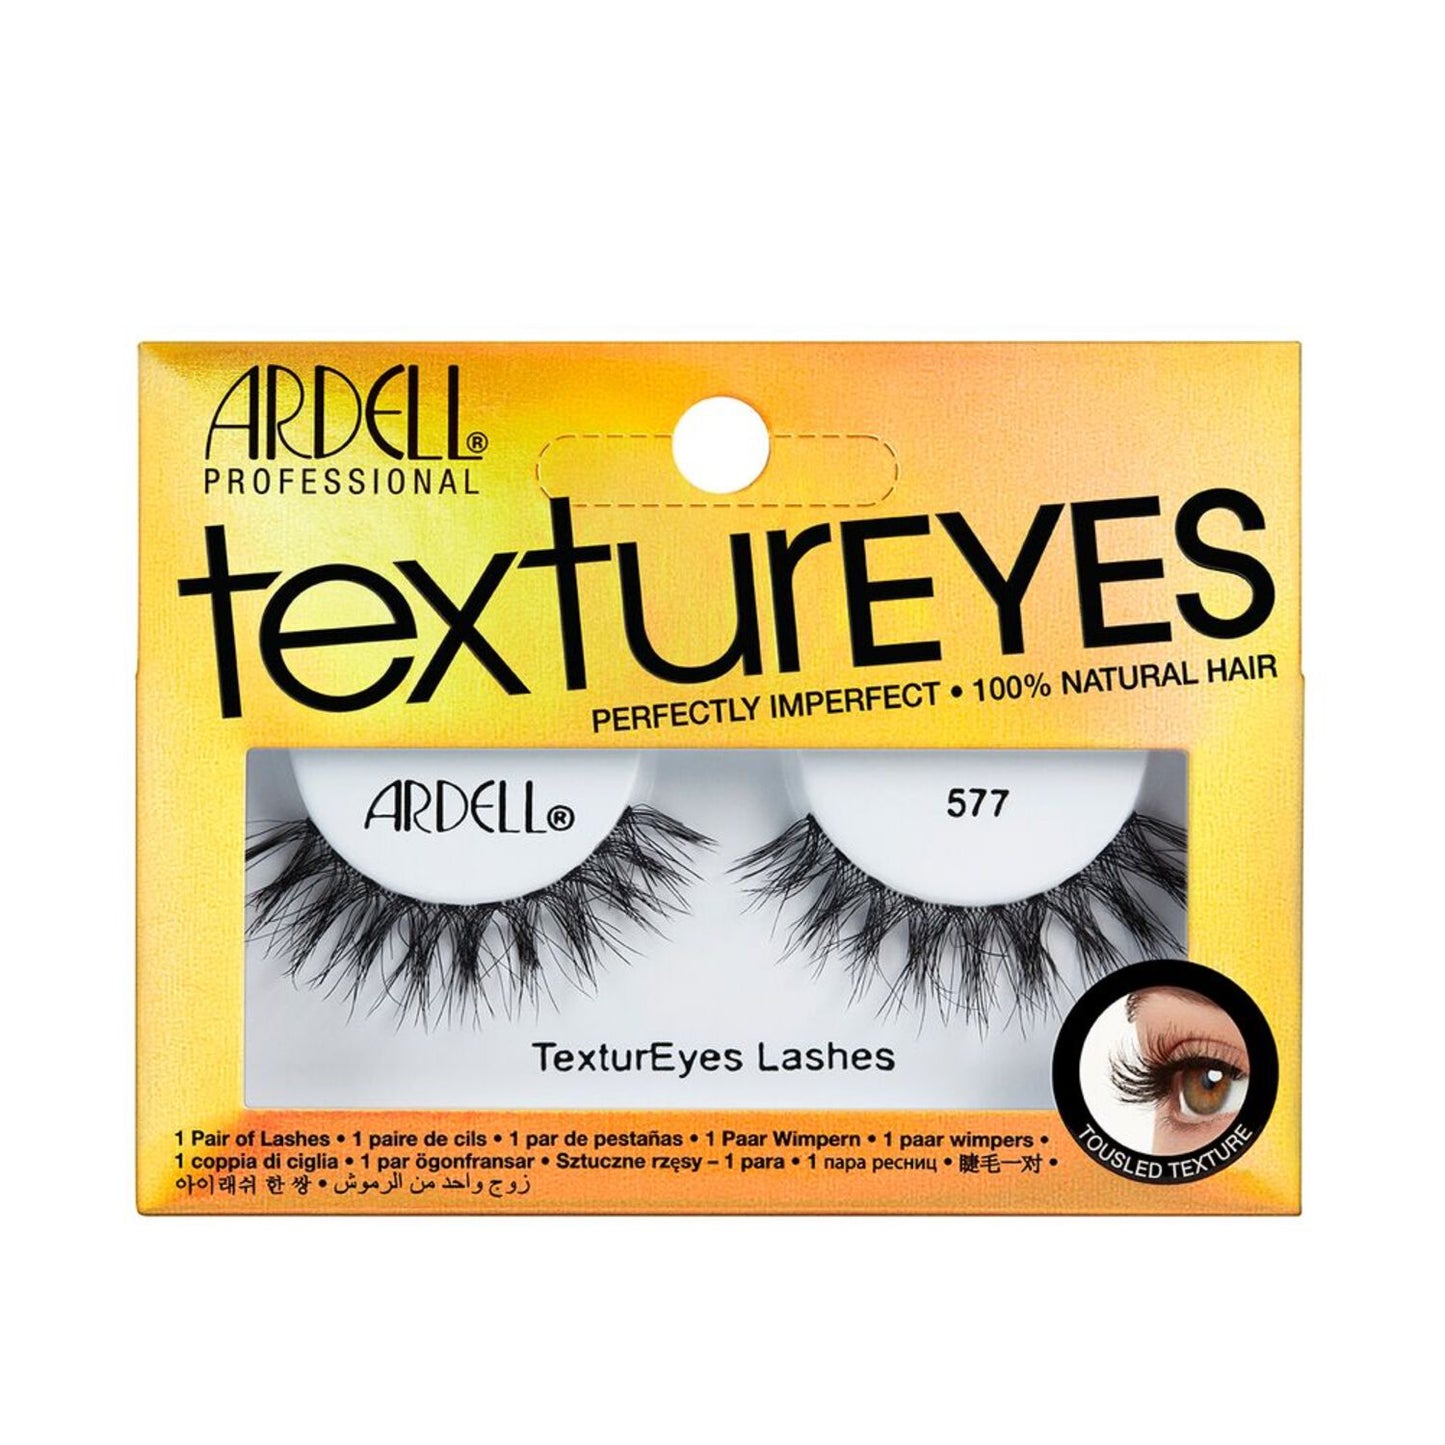 TexturEyes Lashes  by   Ardell TexturEyes #577 Lashes